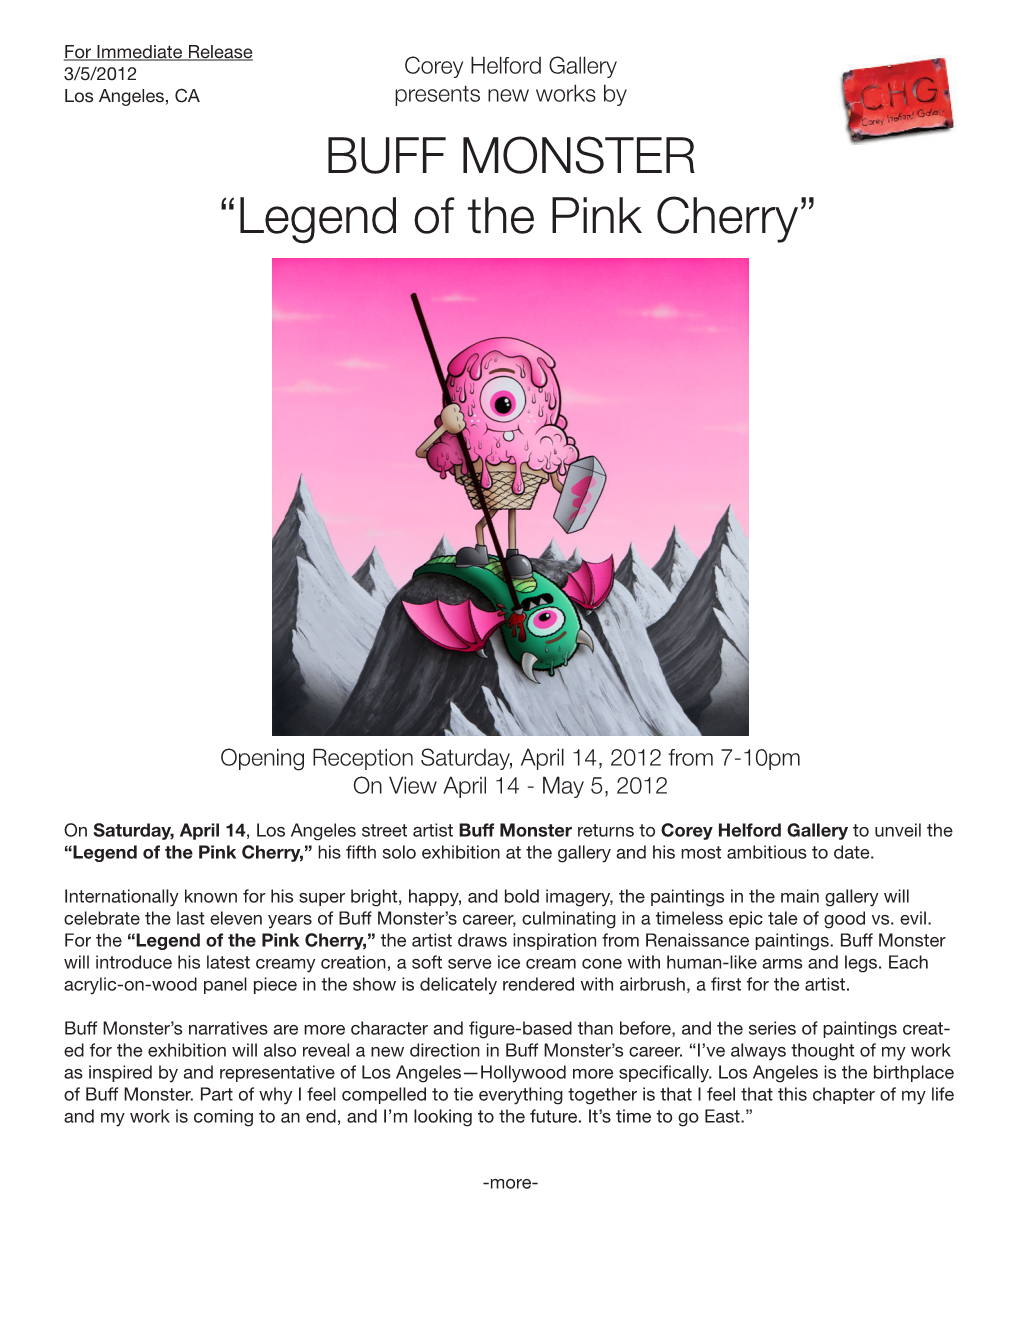 BUFF MONSTER “Legend of the Pink Cherry”